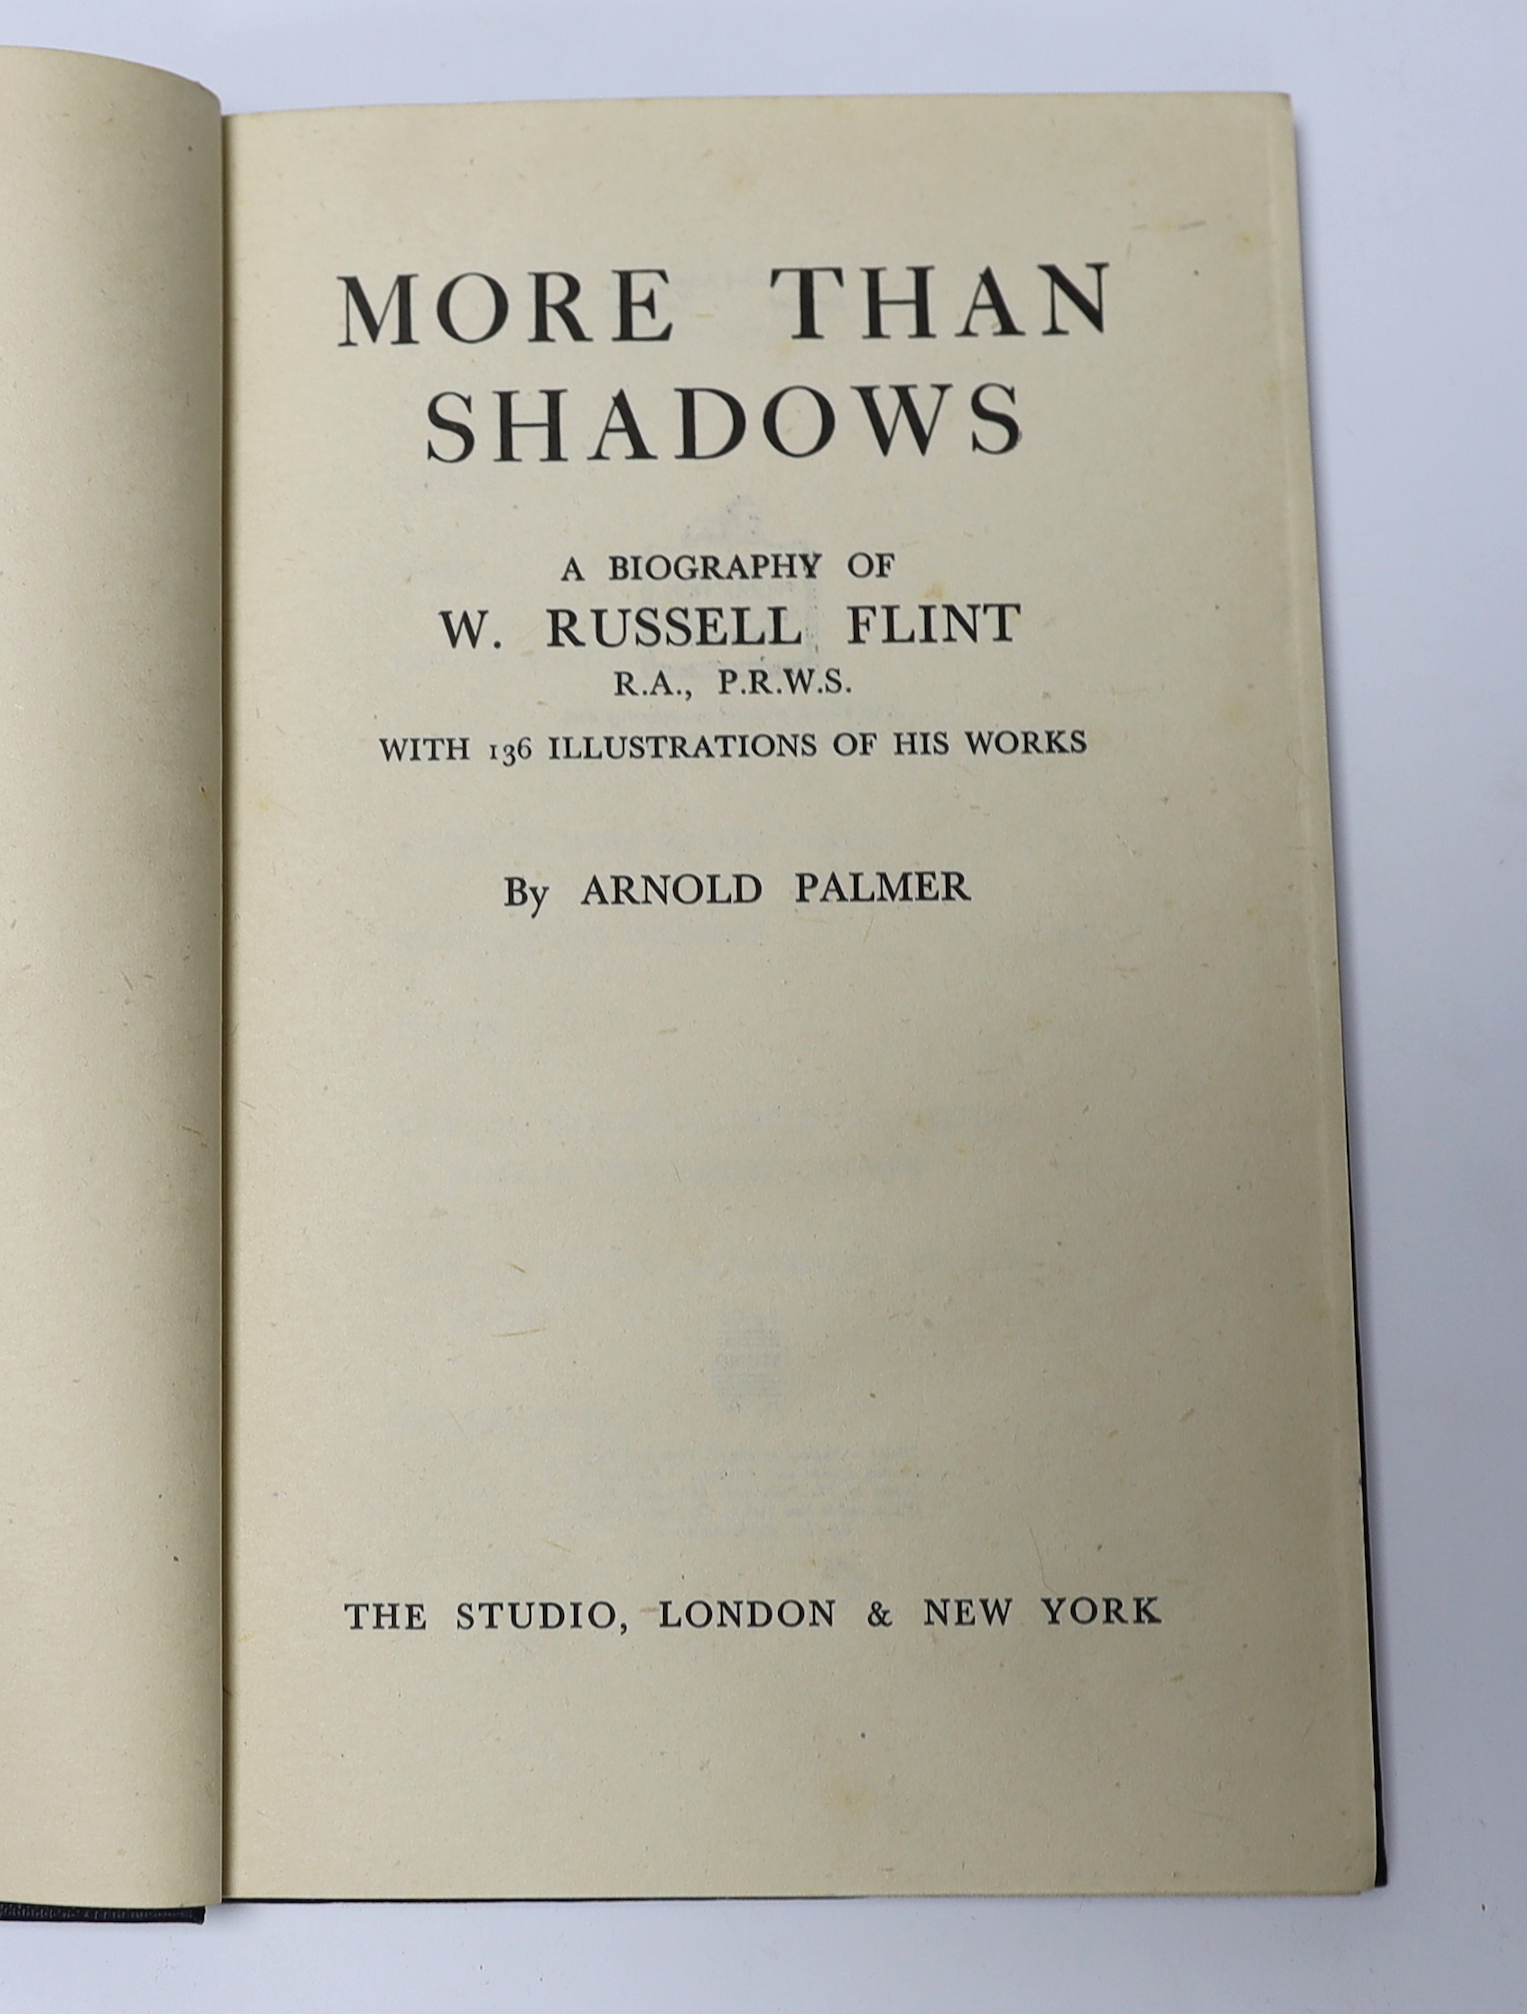 Flint, Sir William Russell - 2 works - Shadows in Arcady, one of 500, signed, 4to, cloth, Charles Skilton, London, 1965, in slip case; Models of Propriety, one of 500, signed, Michael Joseph, London, 1951, in slip case a